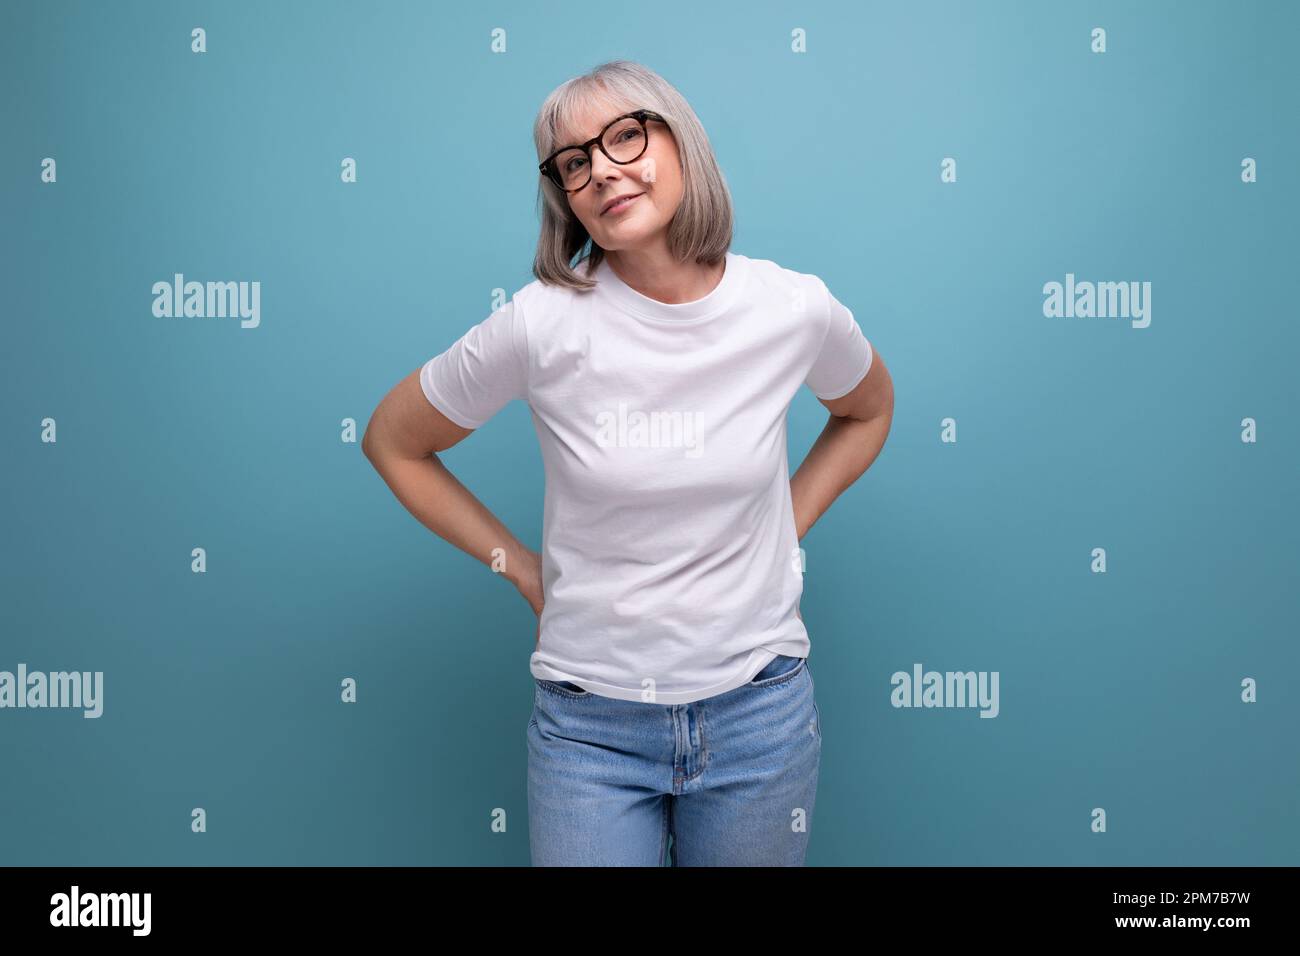 mature lady with bob haircut posing on studio background with mocap Stock Photo